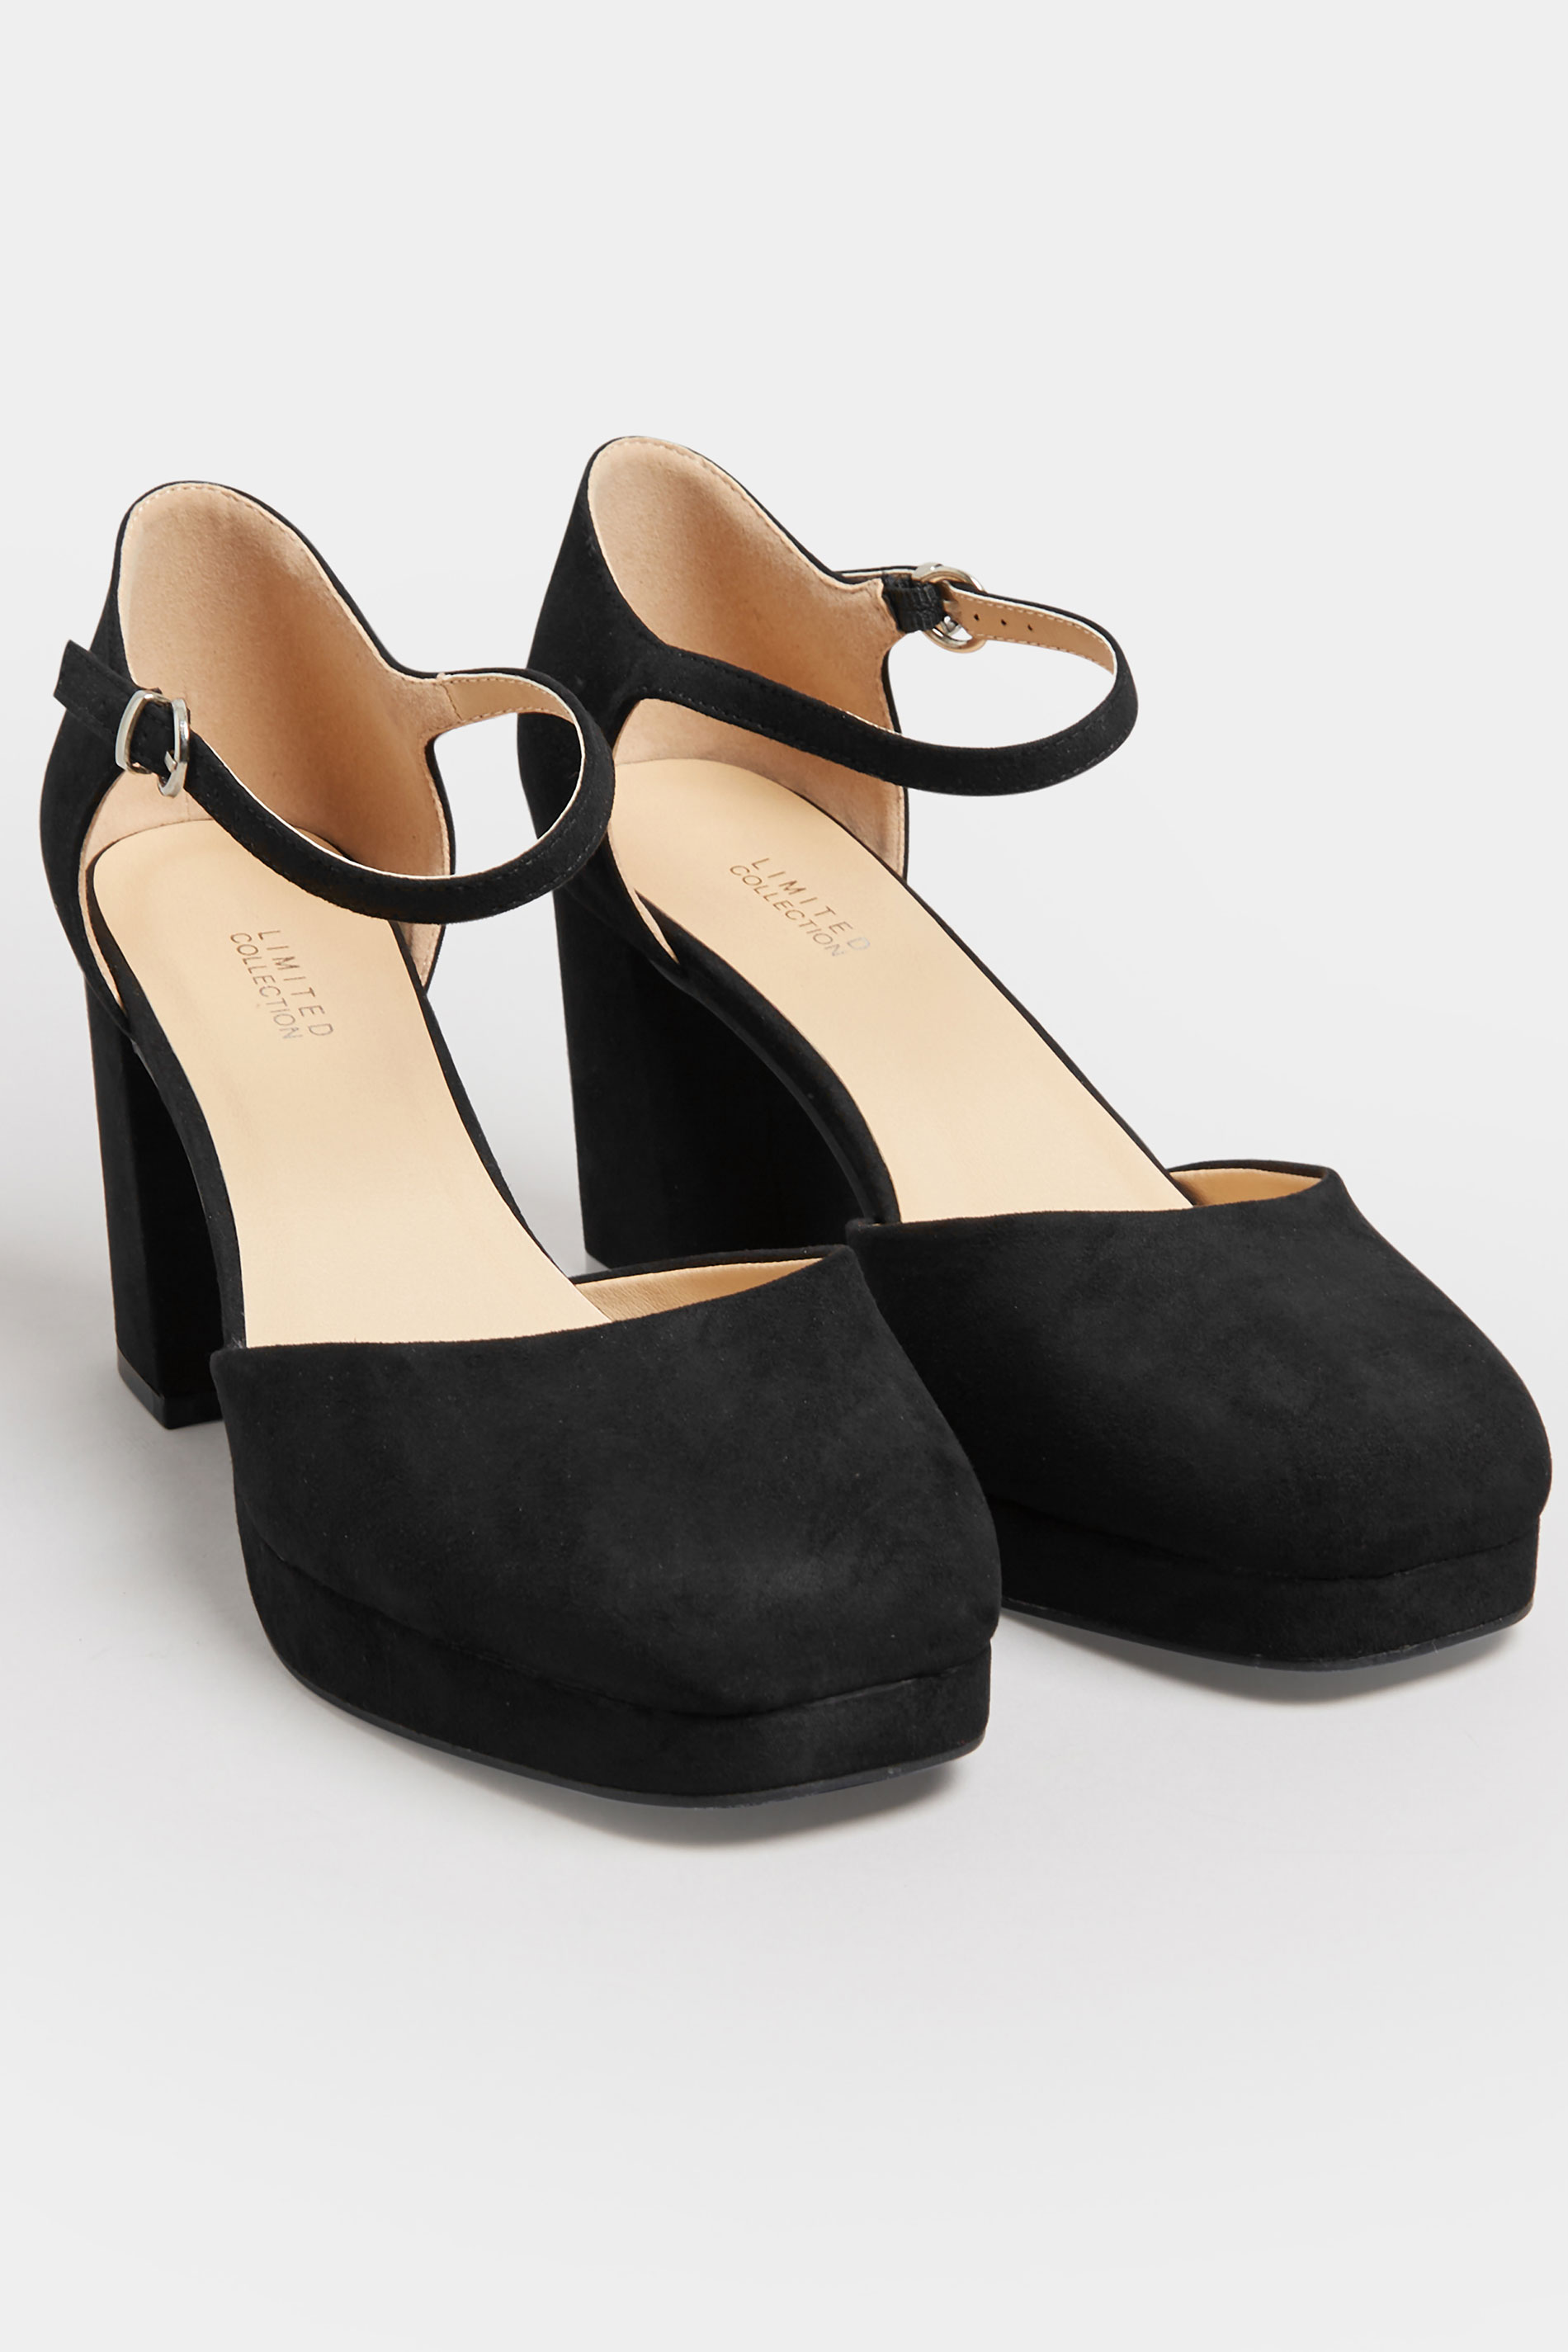 LIMITED COLLECTION Black Platform Court Shoes In Extra Wide EEE Fit | Yours Clothing 1